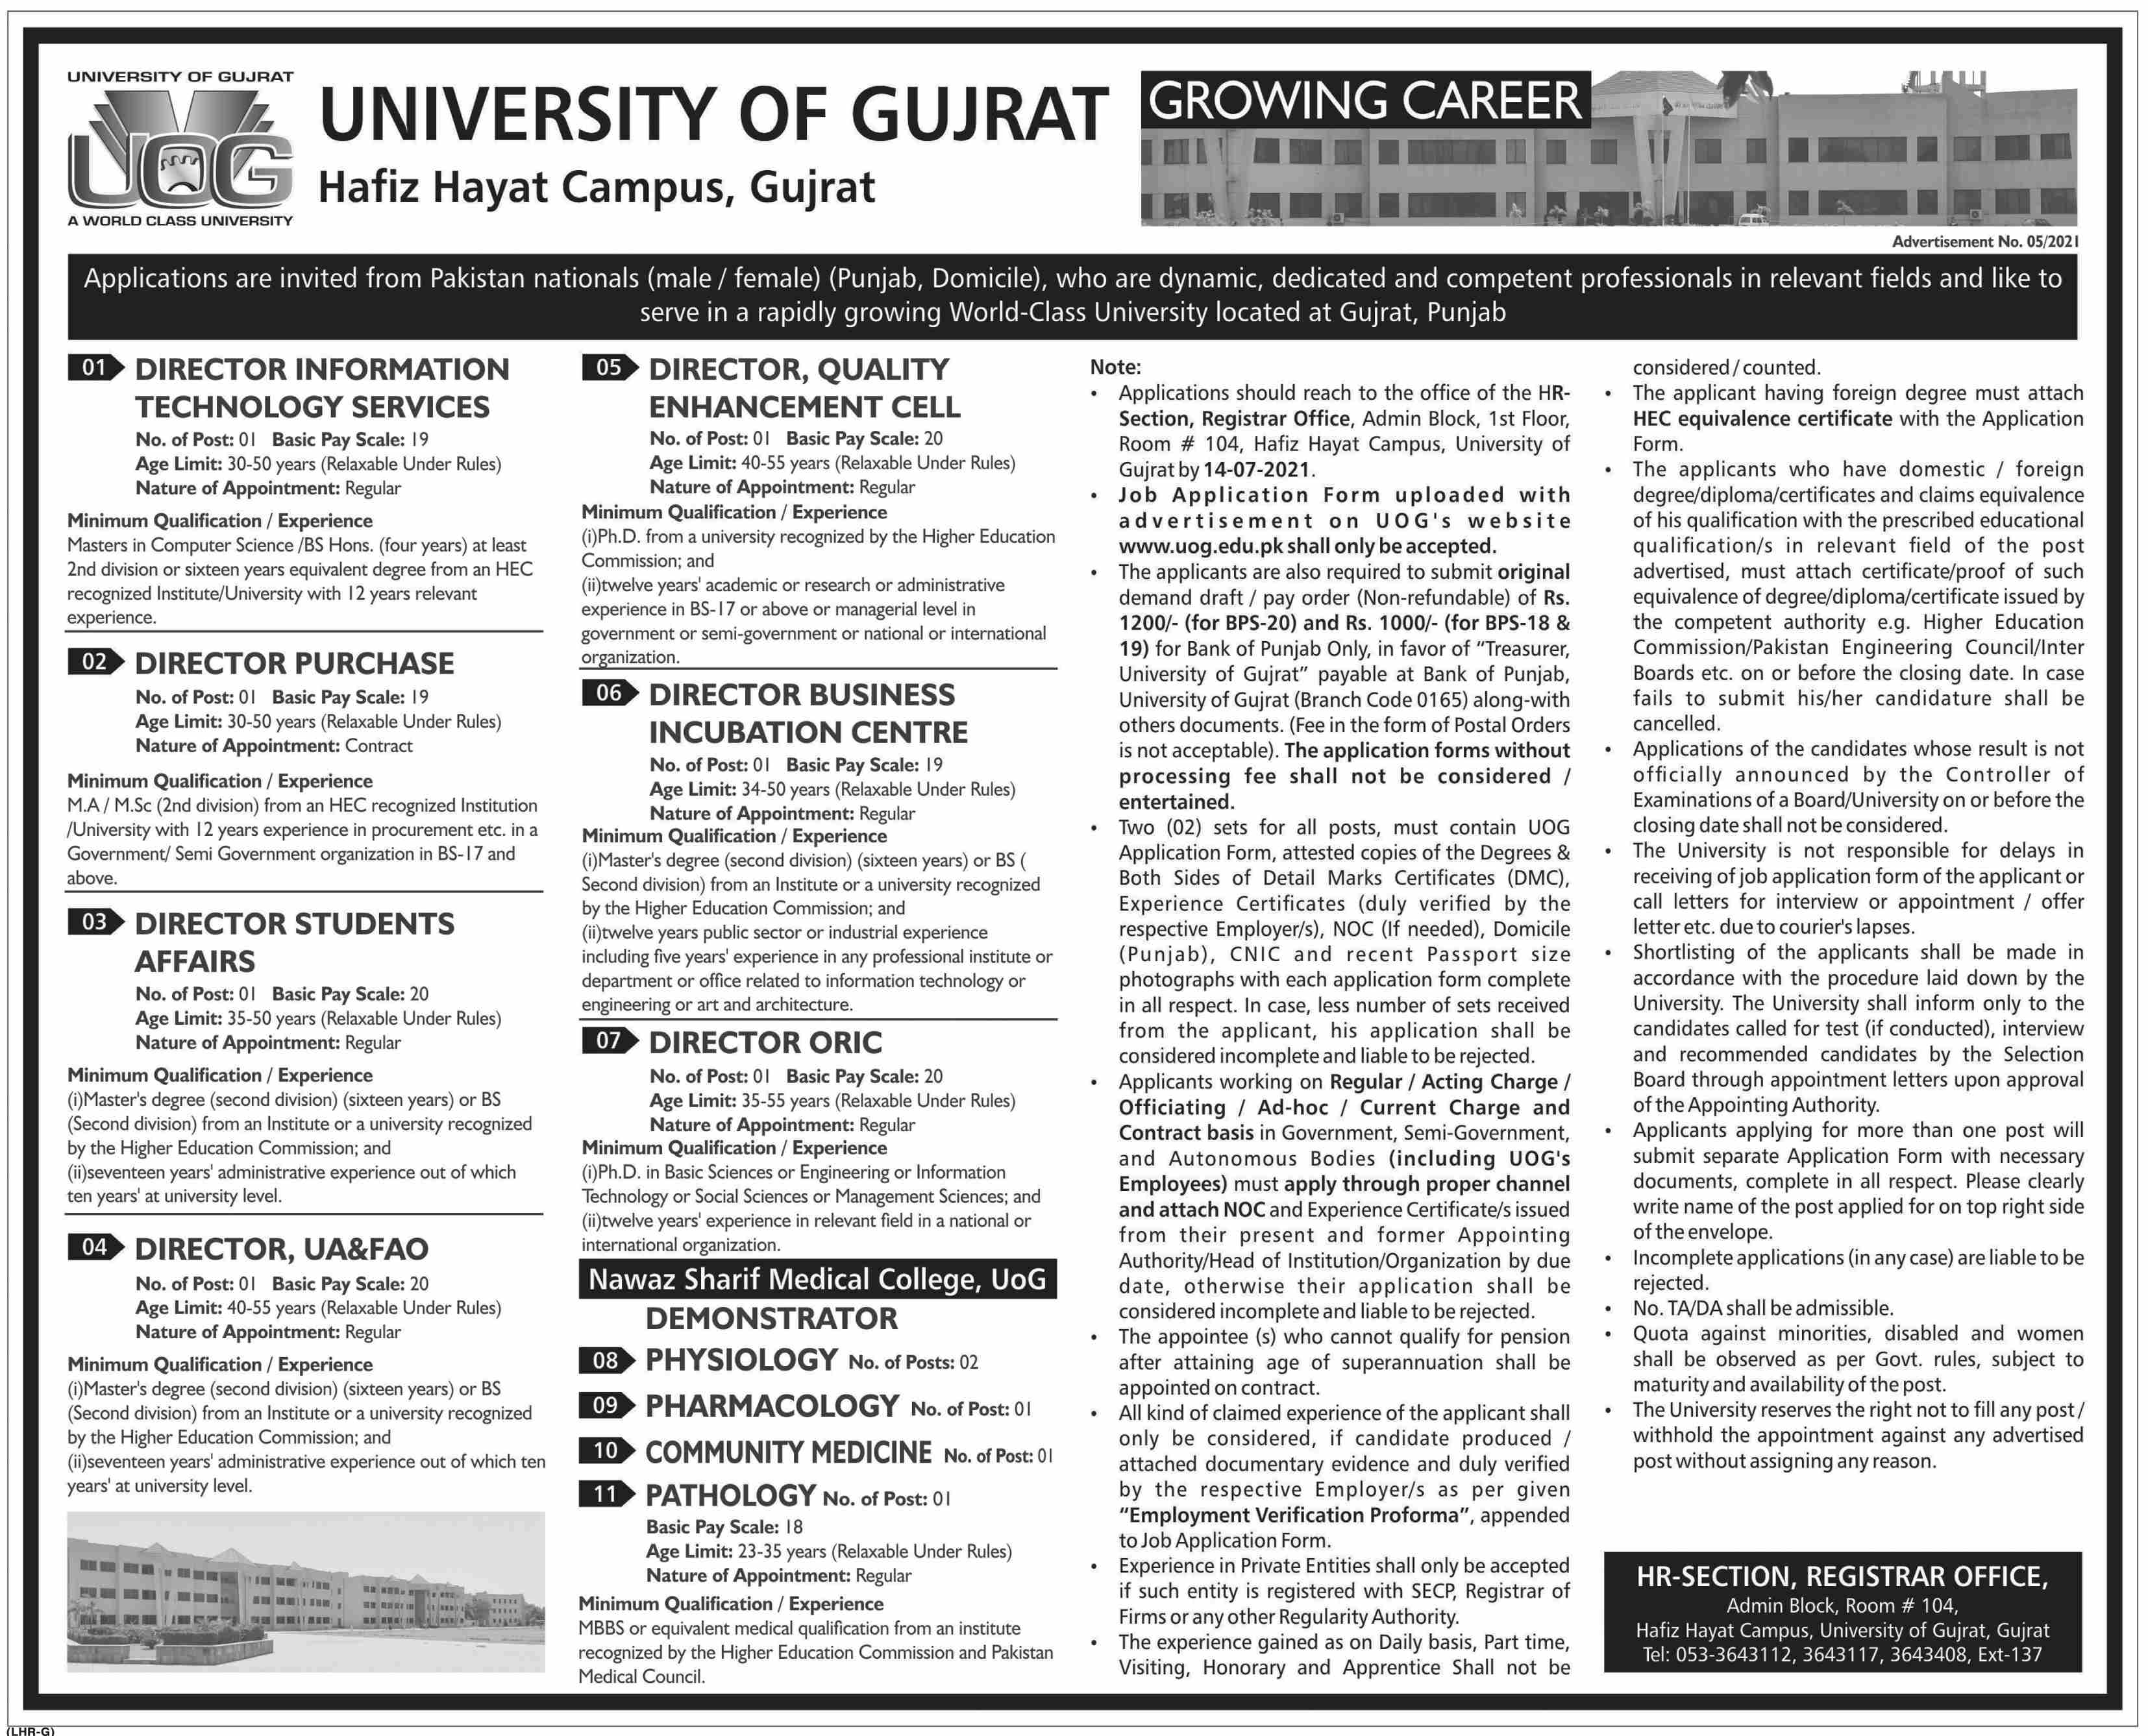 Director Information Technology Services Jobs in University of Gujrat , 2021.